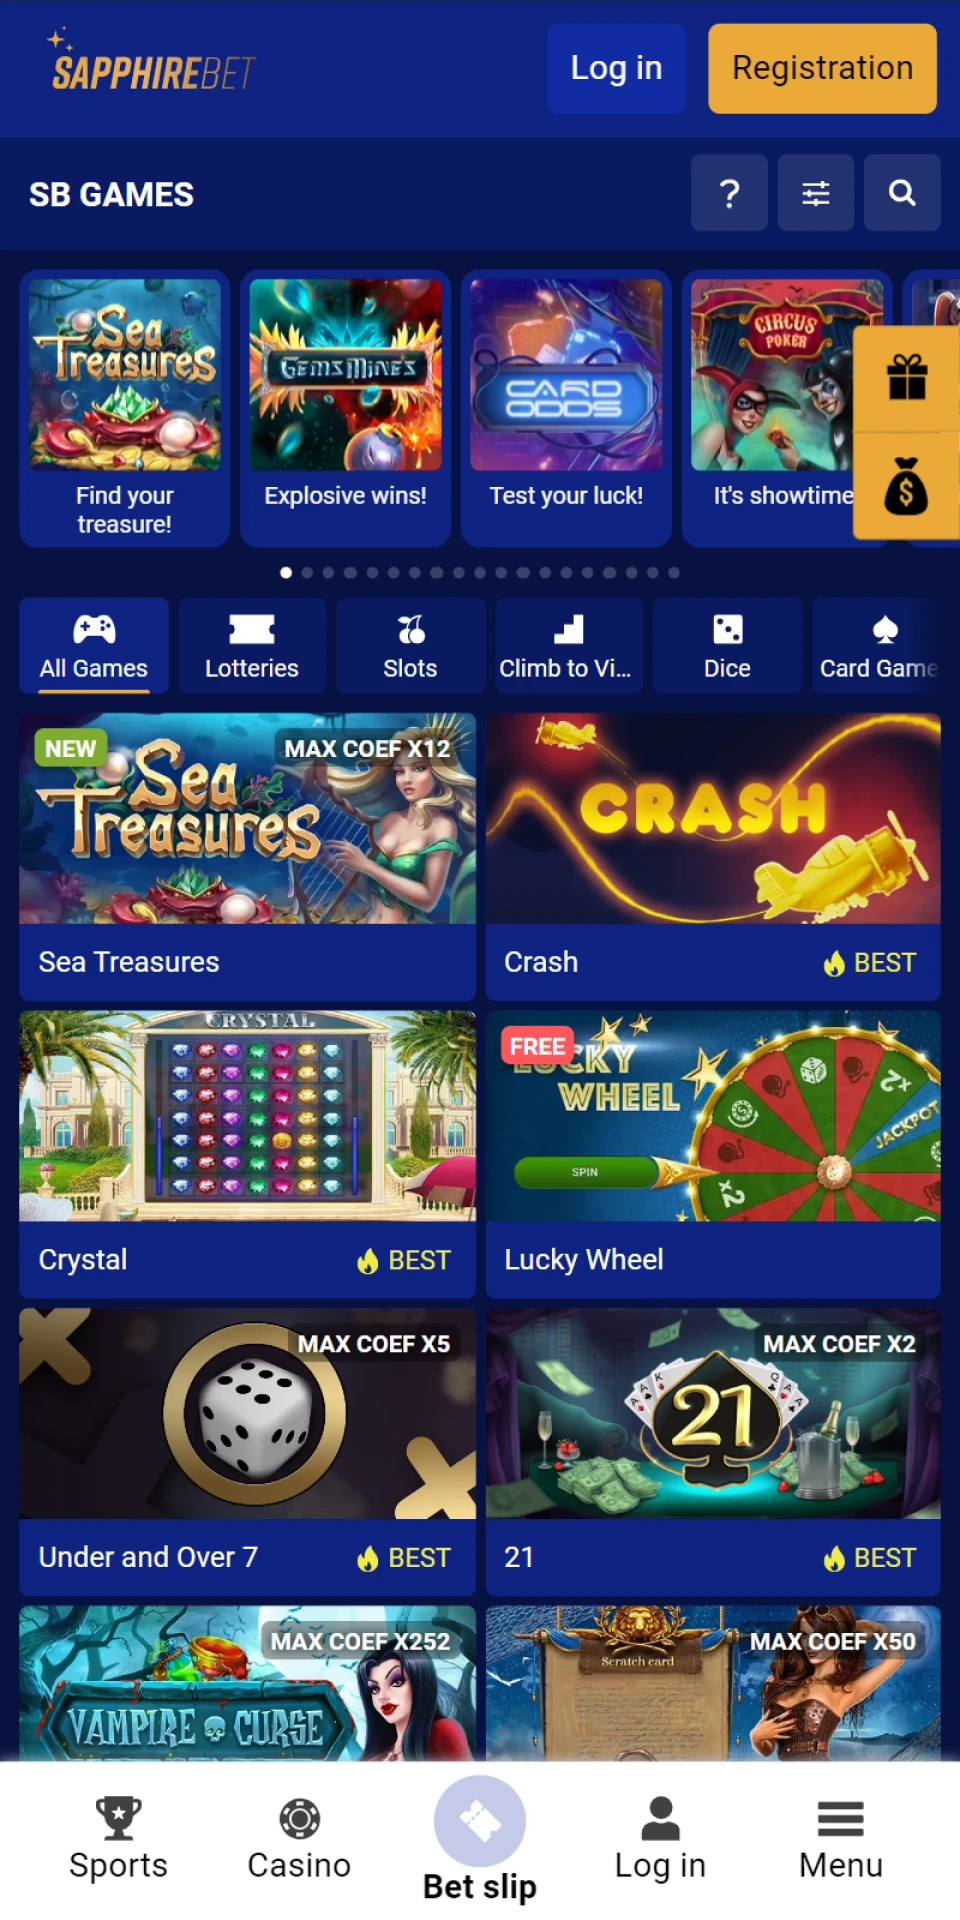 In the Sapphirebet application you can not only place bets, but also gamble.